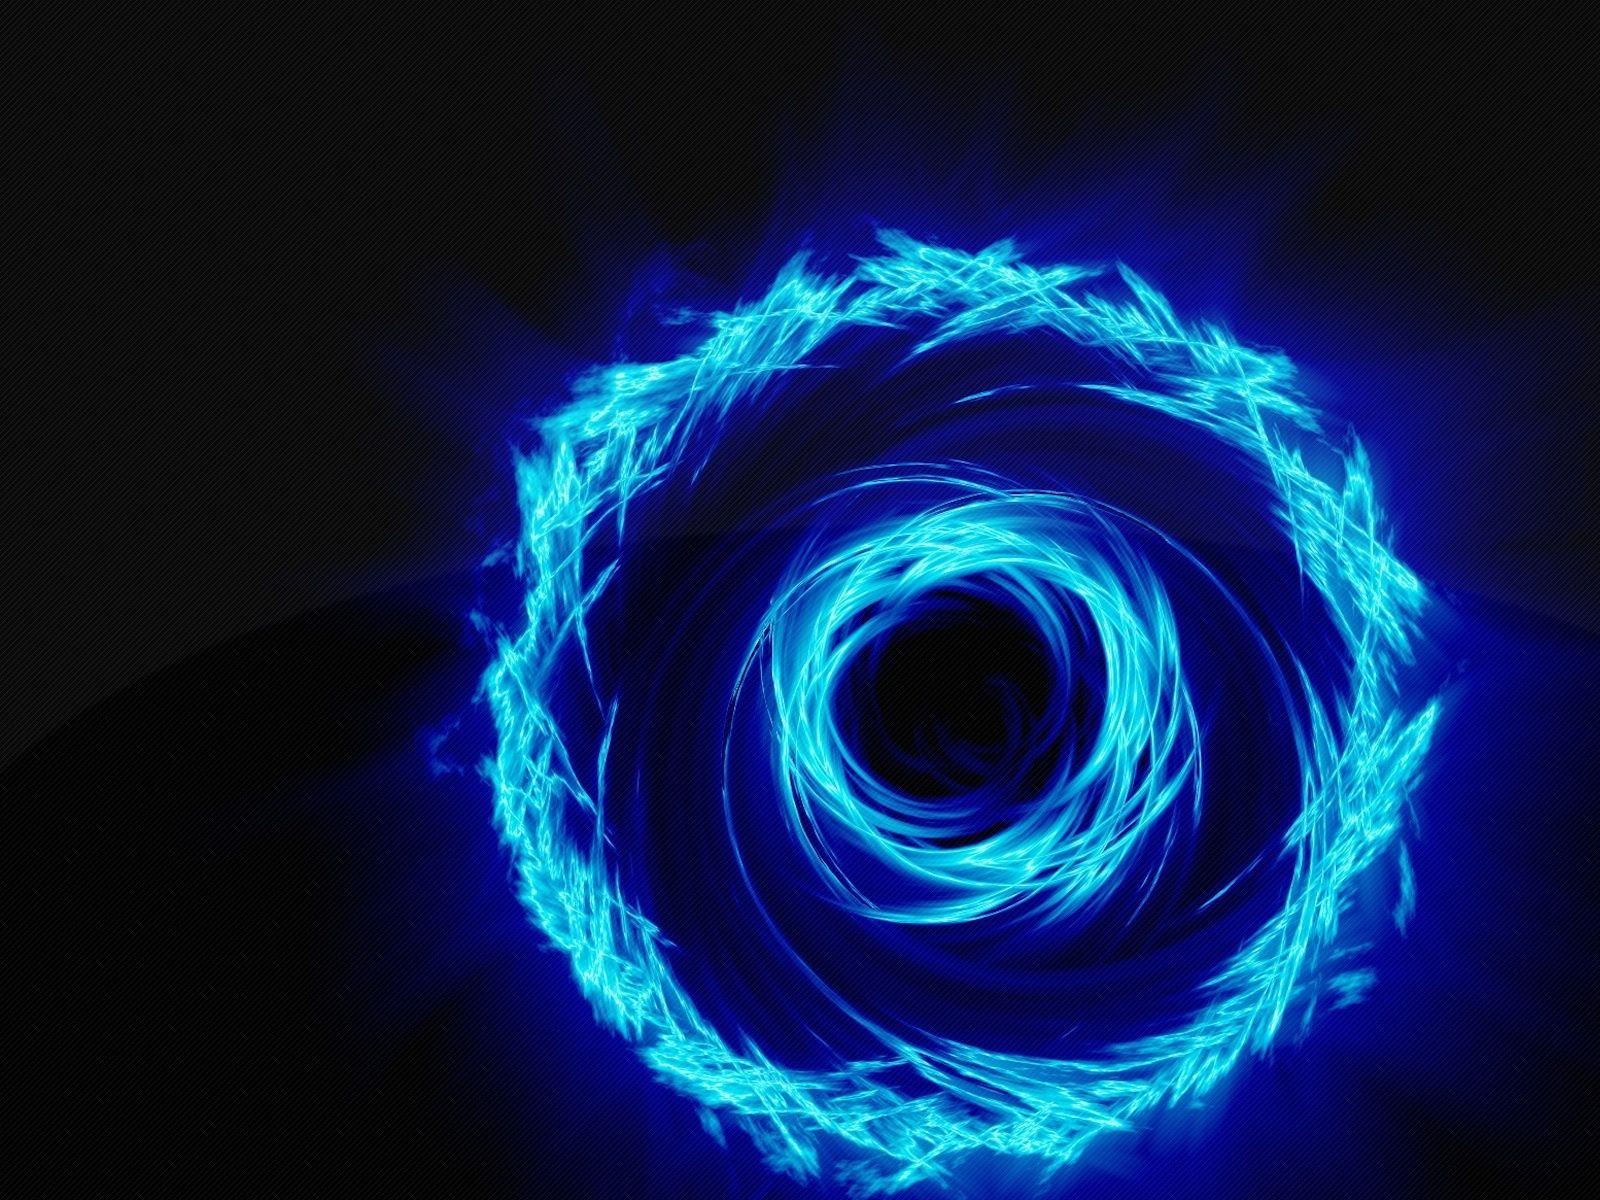 Flame and Blue Circle Logo - Blue Circle Flame widescreen wallpaper | Wide-Wallpapers.NET